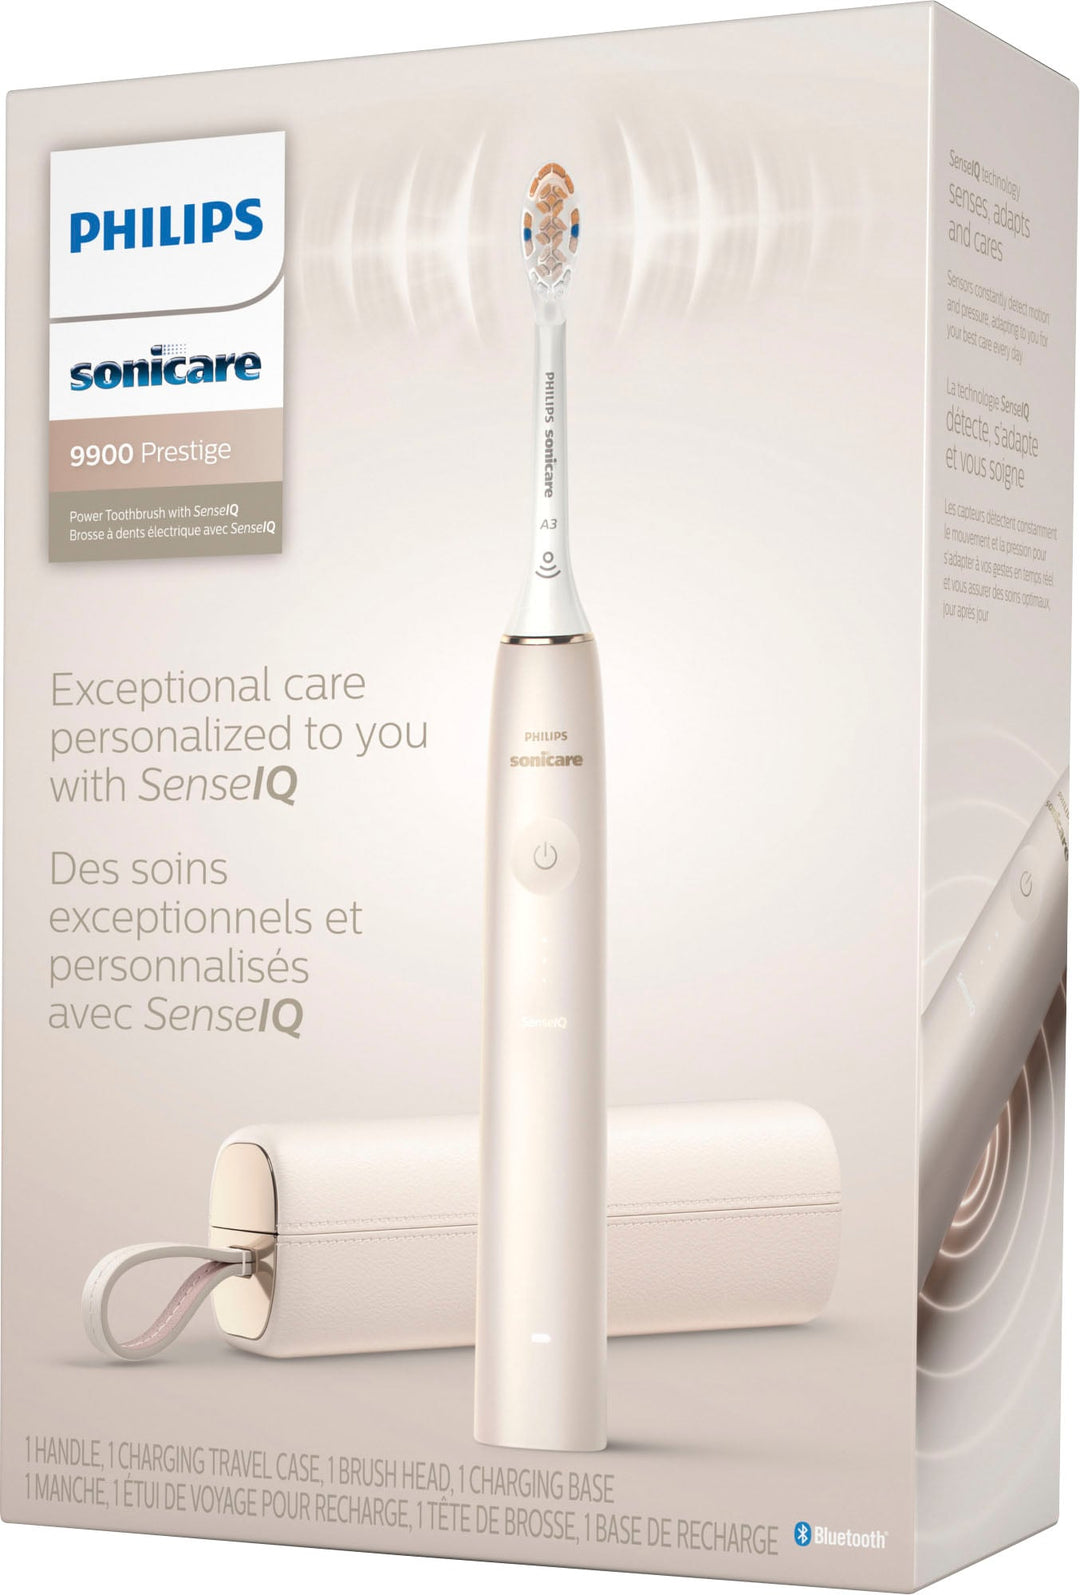 Philips Sonicare 9900 Prestige Rechargeable Electric Toothbrush with SenseIQ - Champagne_14